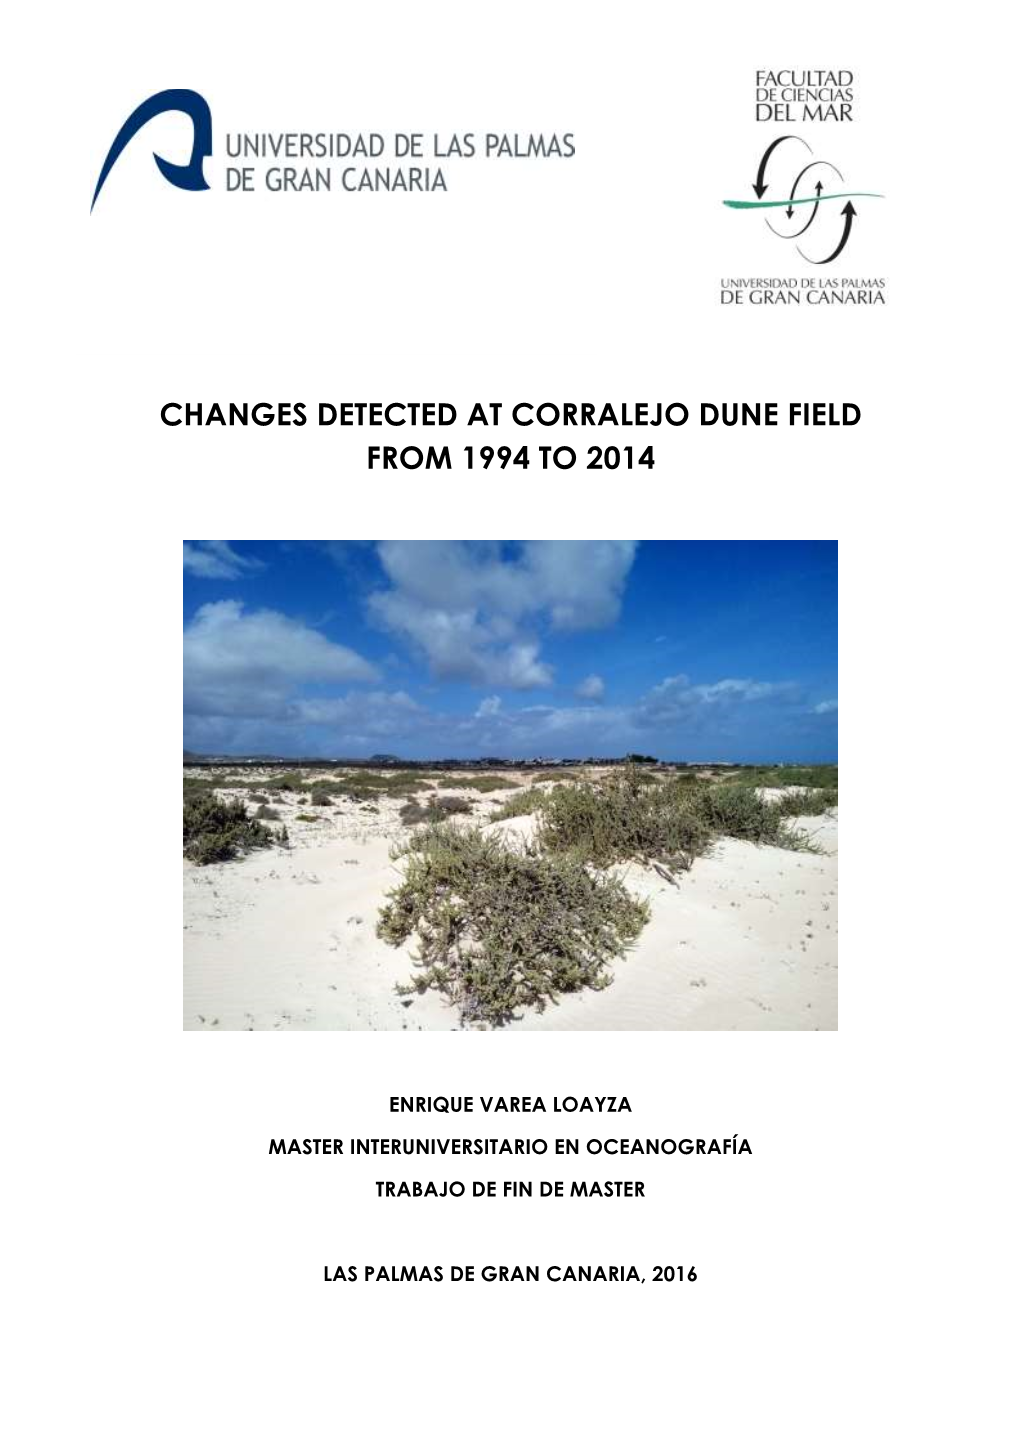 Changes Detected at Corralejo Dune Field from 1994 to 2014